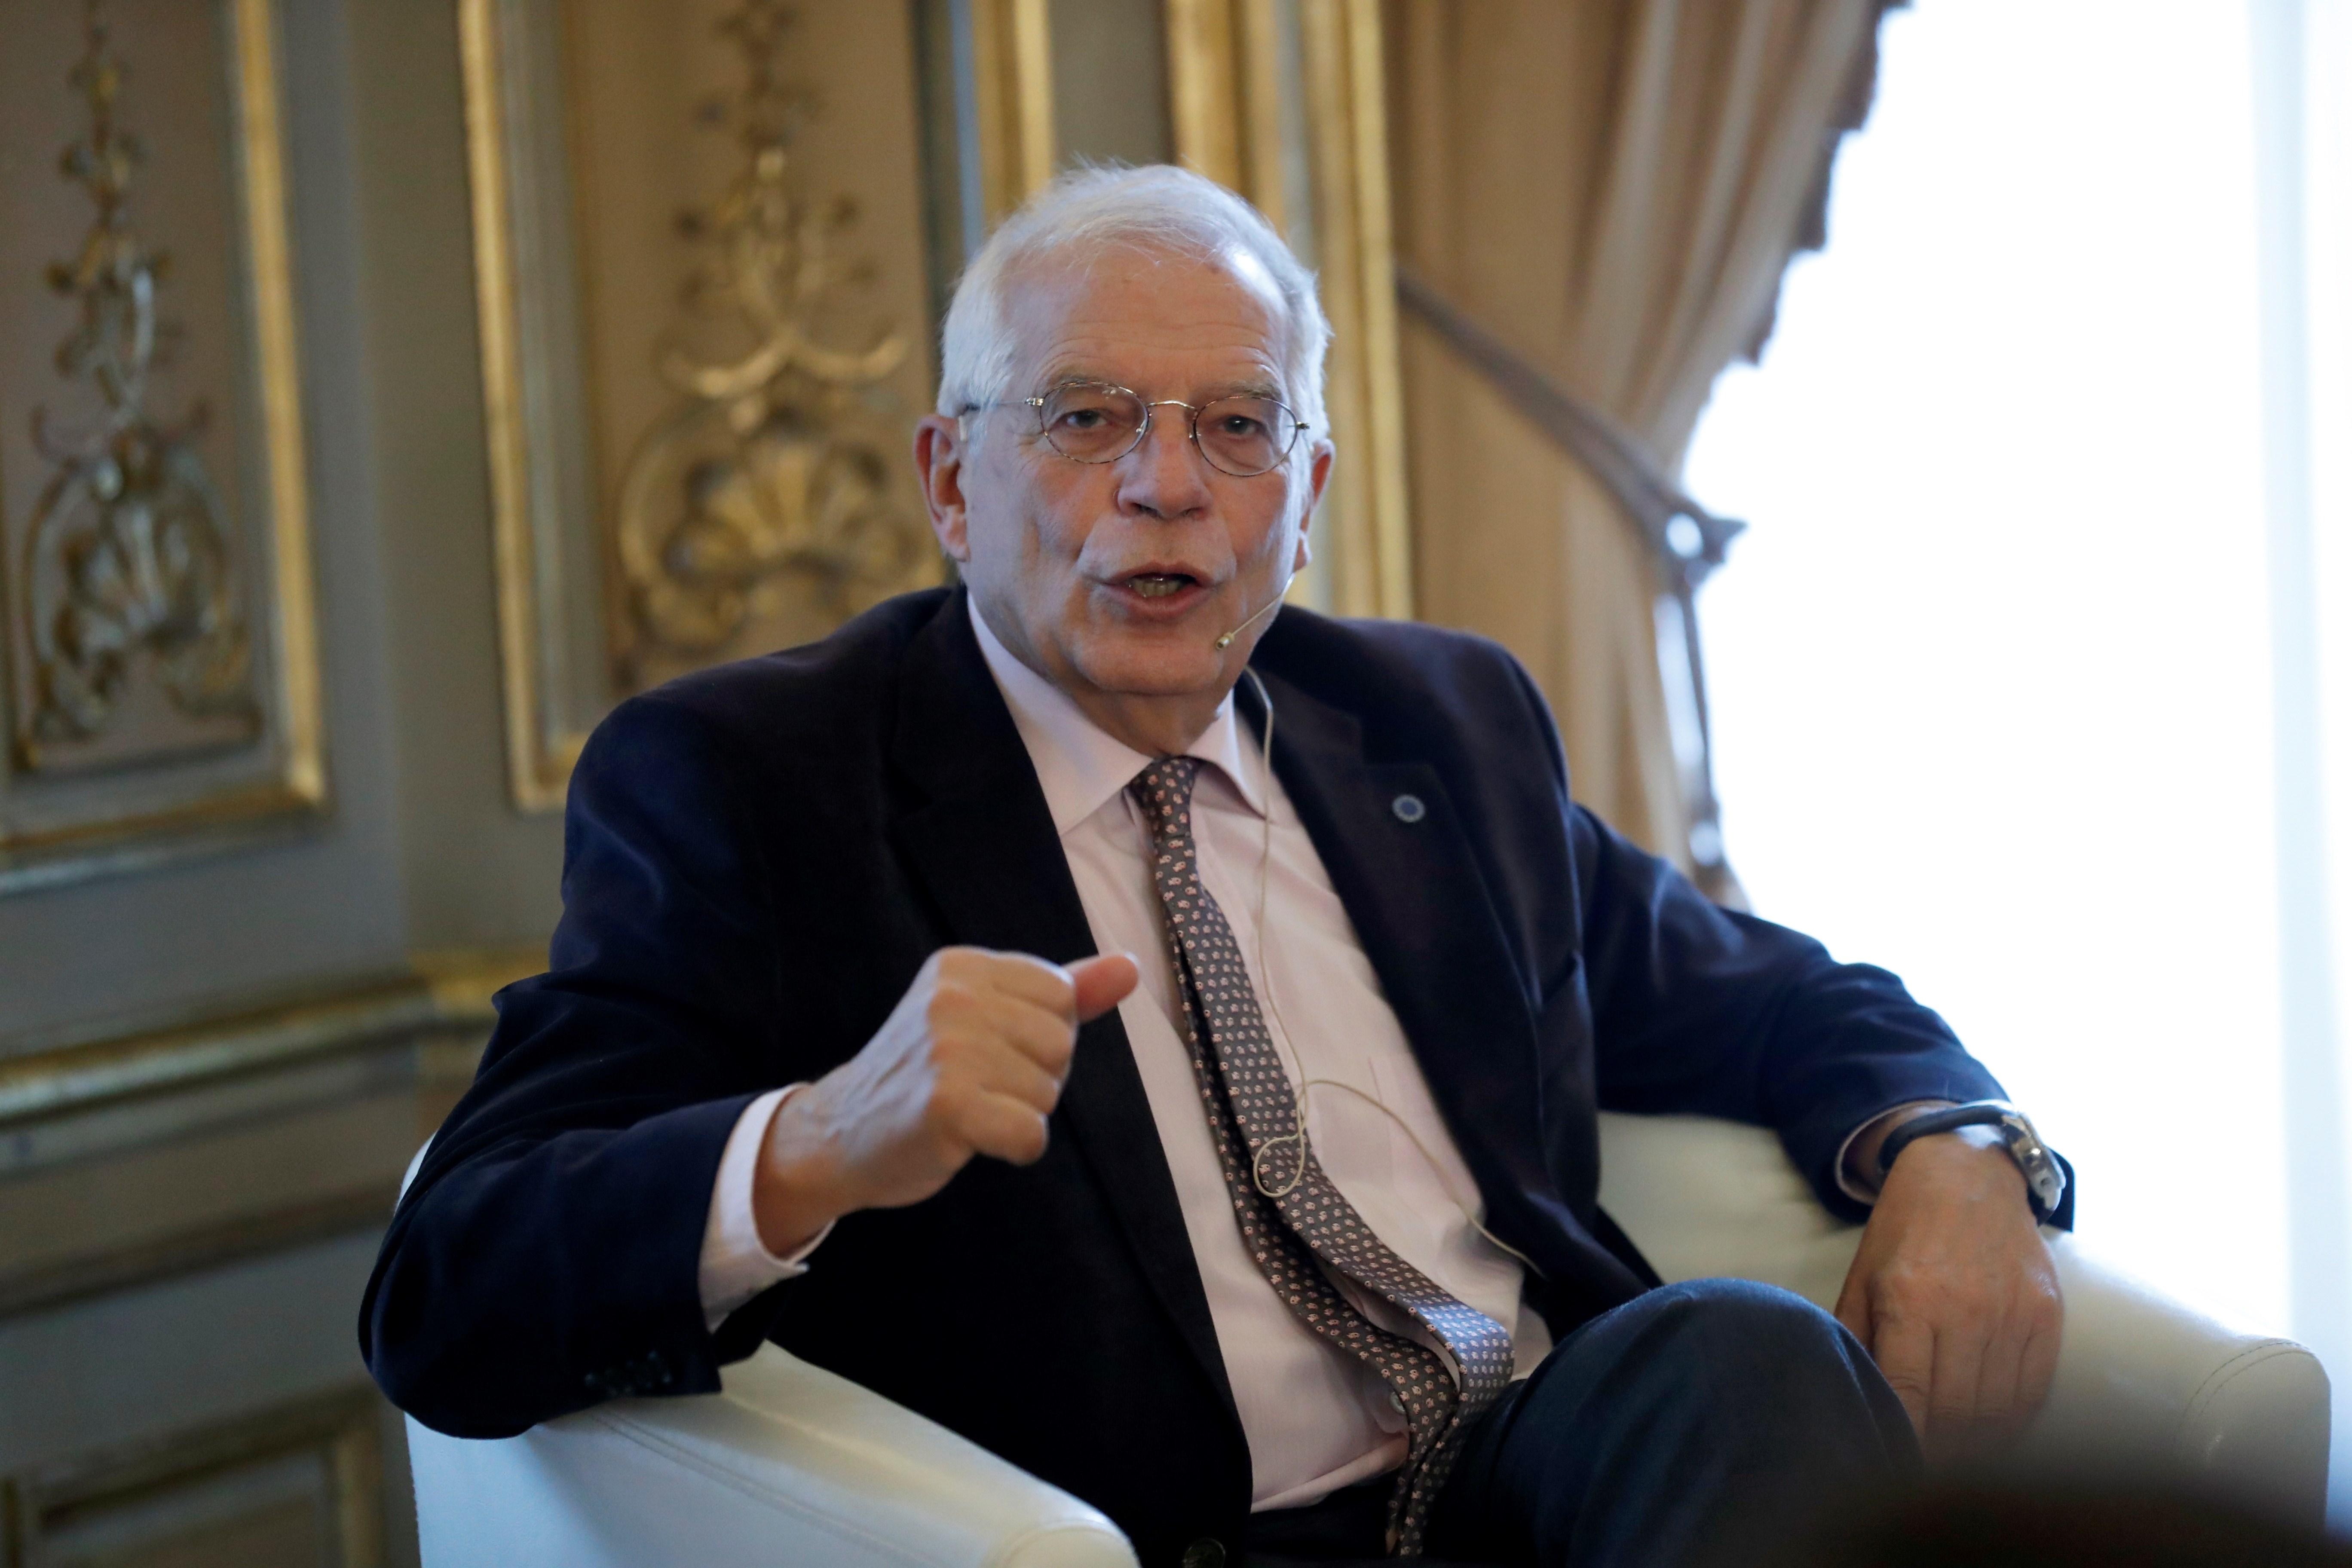 European Commission, after Borrell tweet on Ponsatí, hopes everyone "respects the rules"